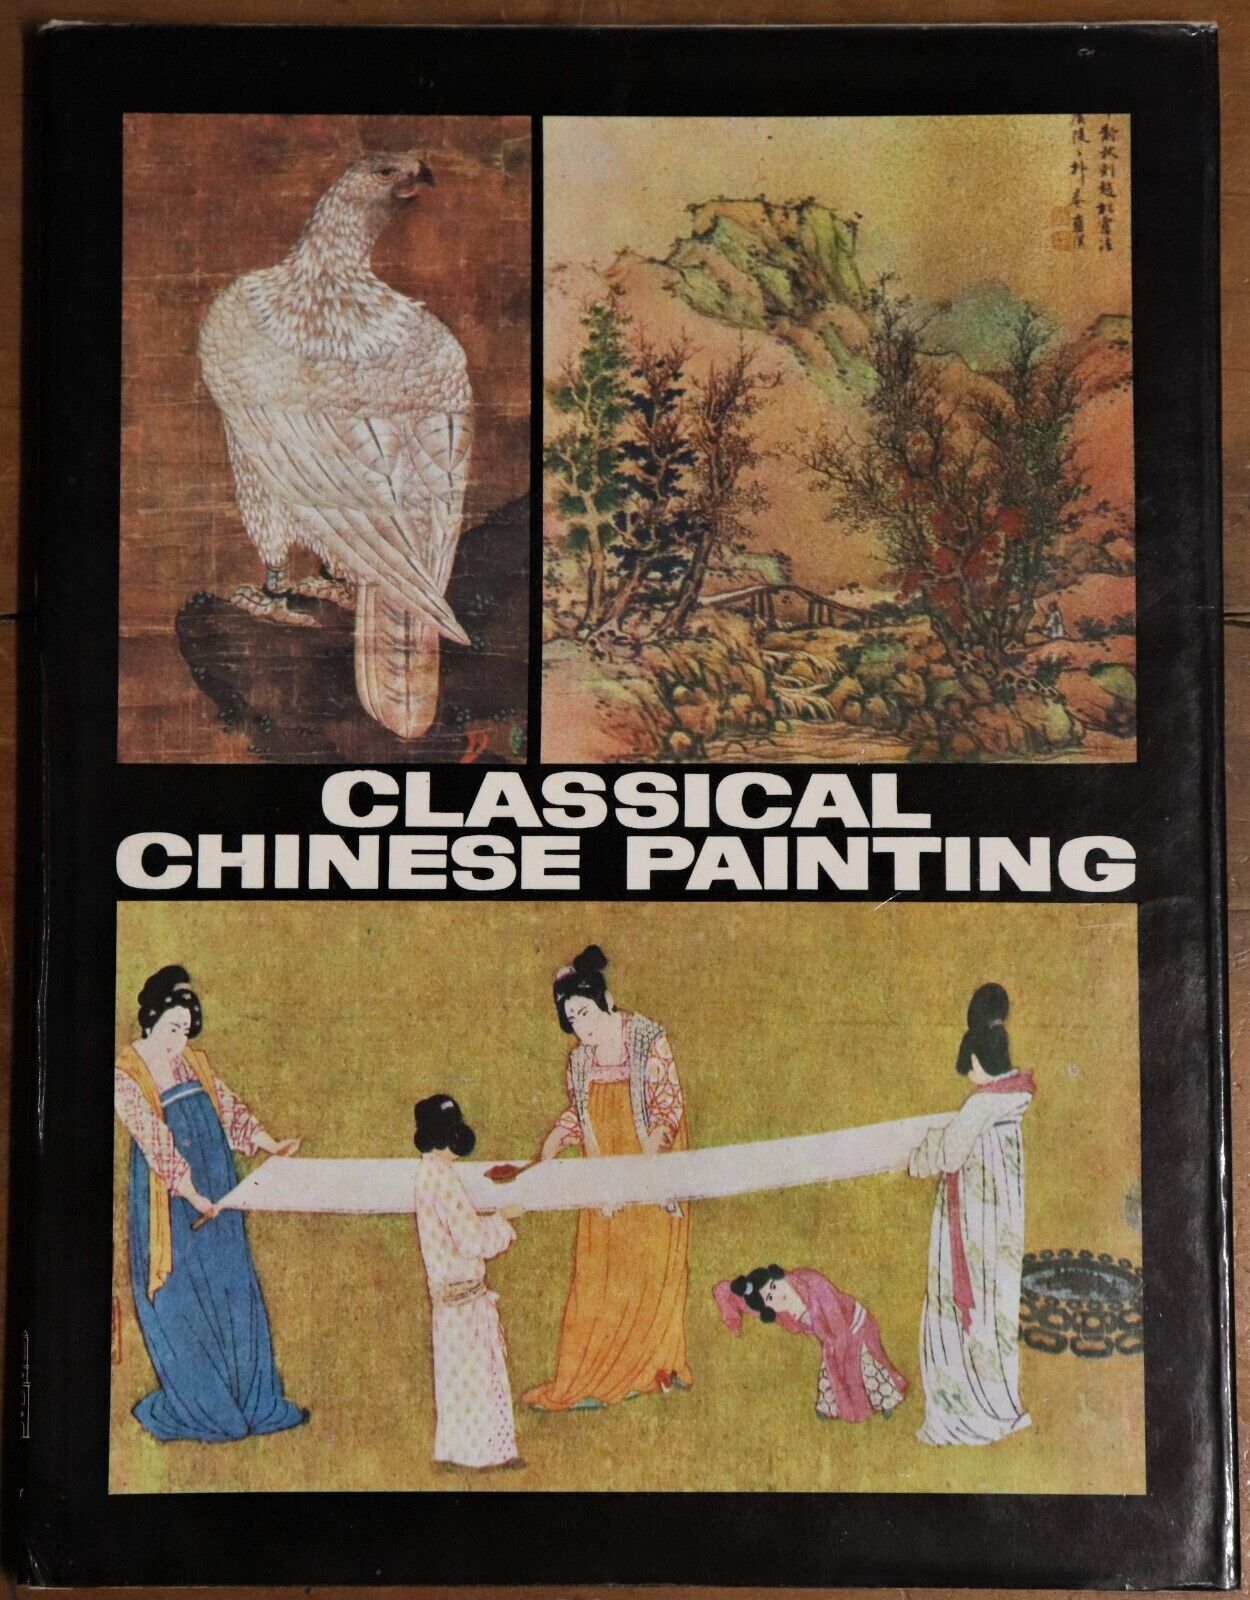 Classical Chinese Painting - 1979 - 1st Edition - Art Book